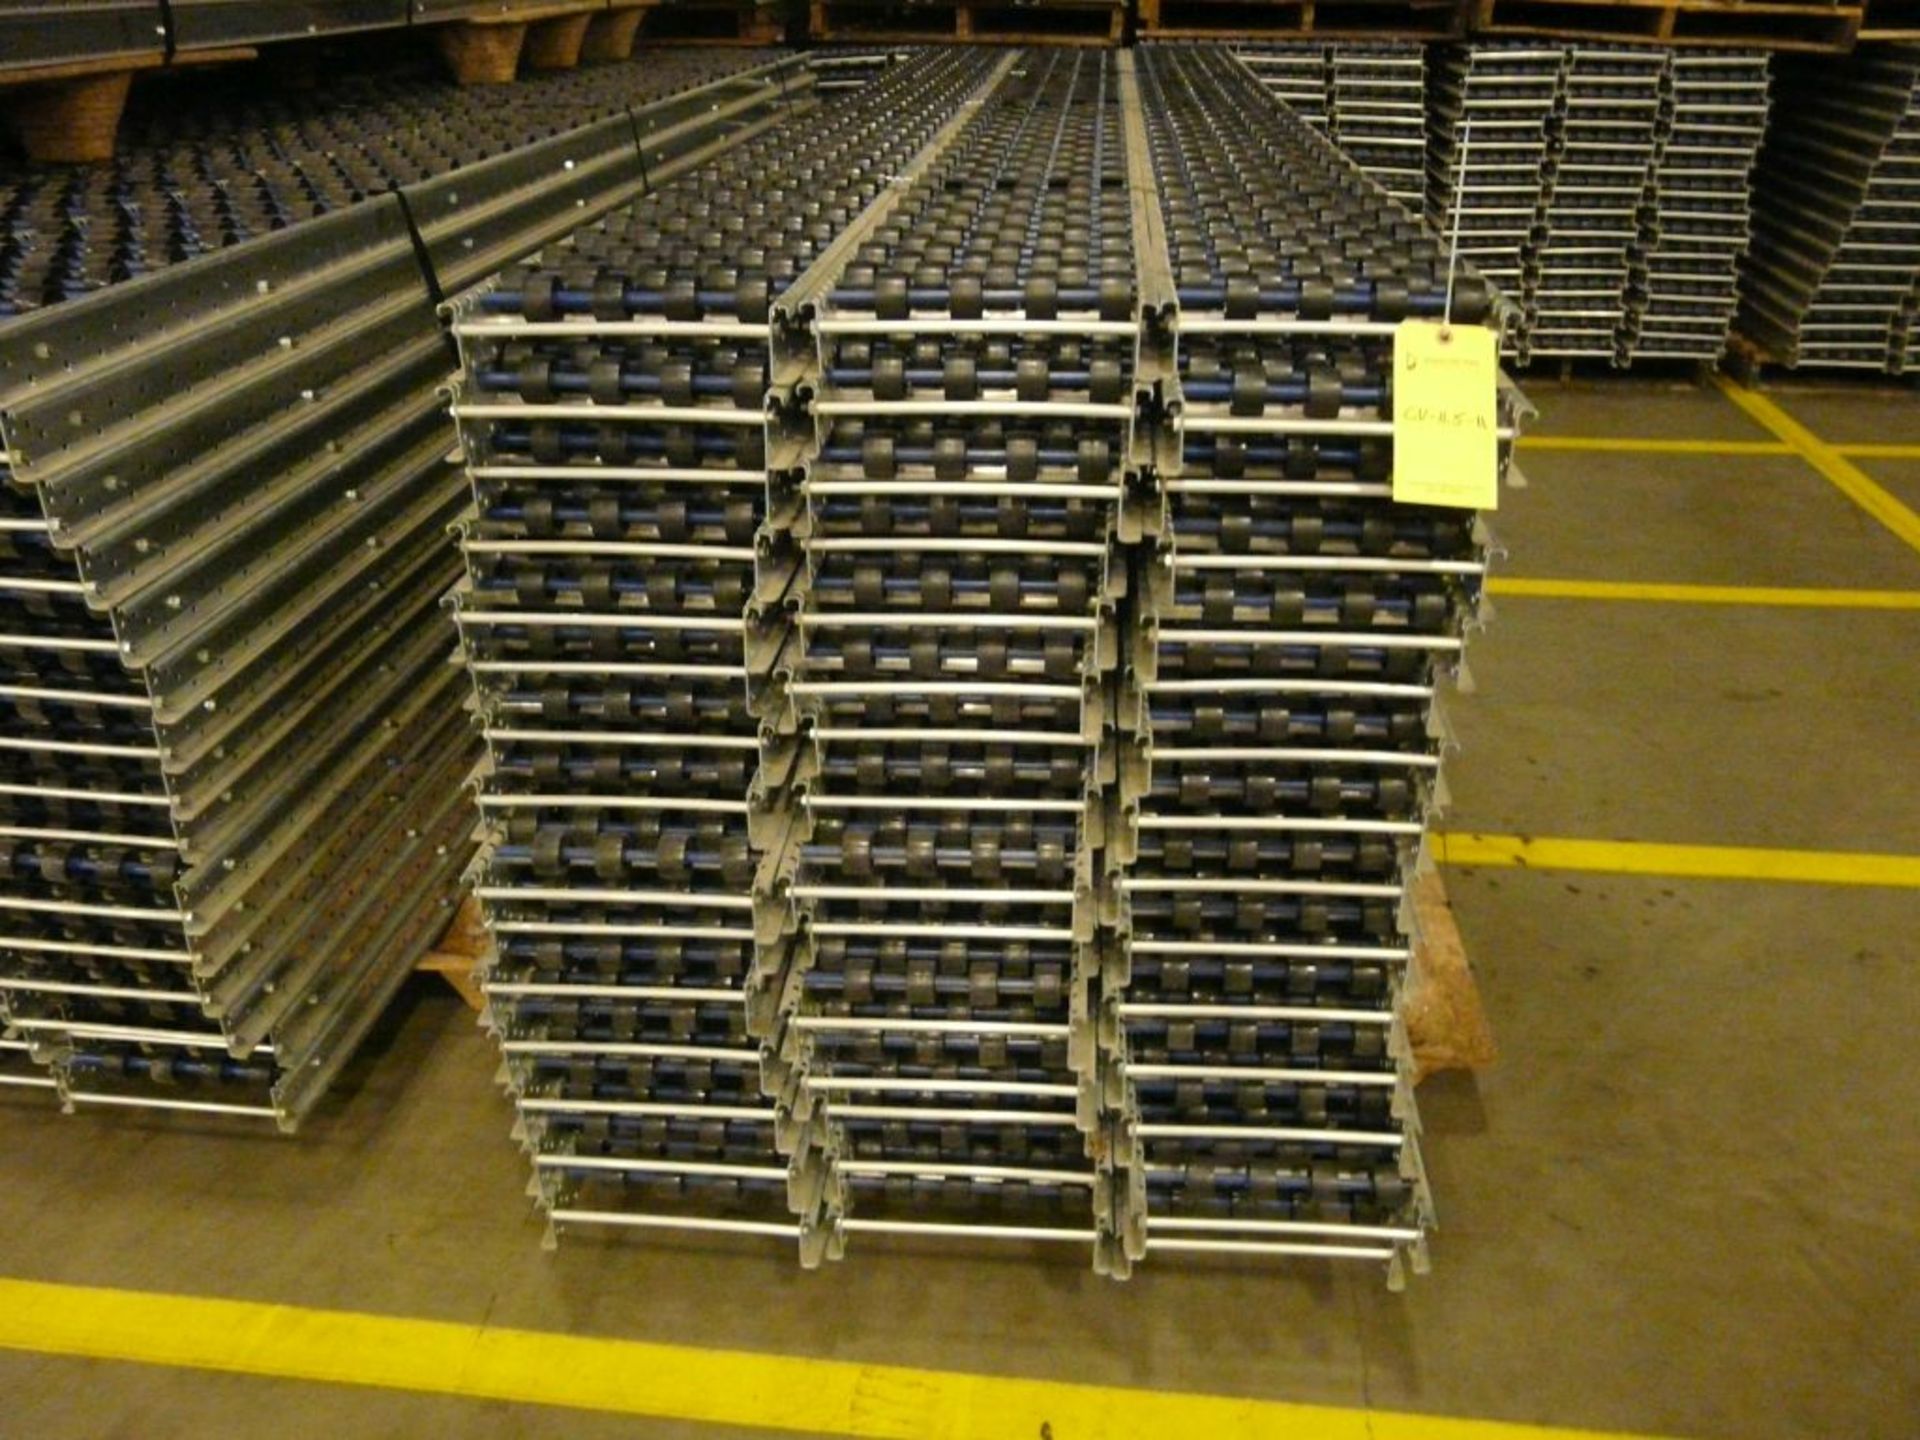 Lot of (90) SpanTrack Wheelbed Carton Flow Conveyors - 11.5'L x 11"W; Tag: 223627 - $30 Lot - Image 2 of 4